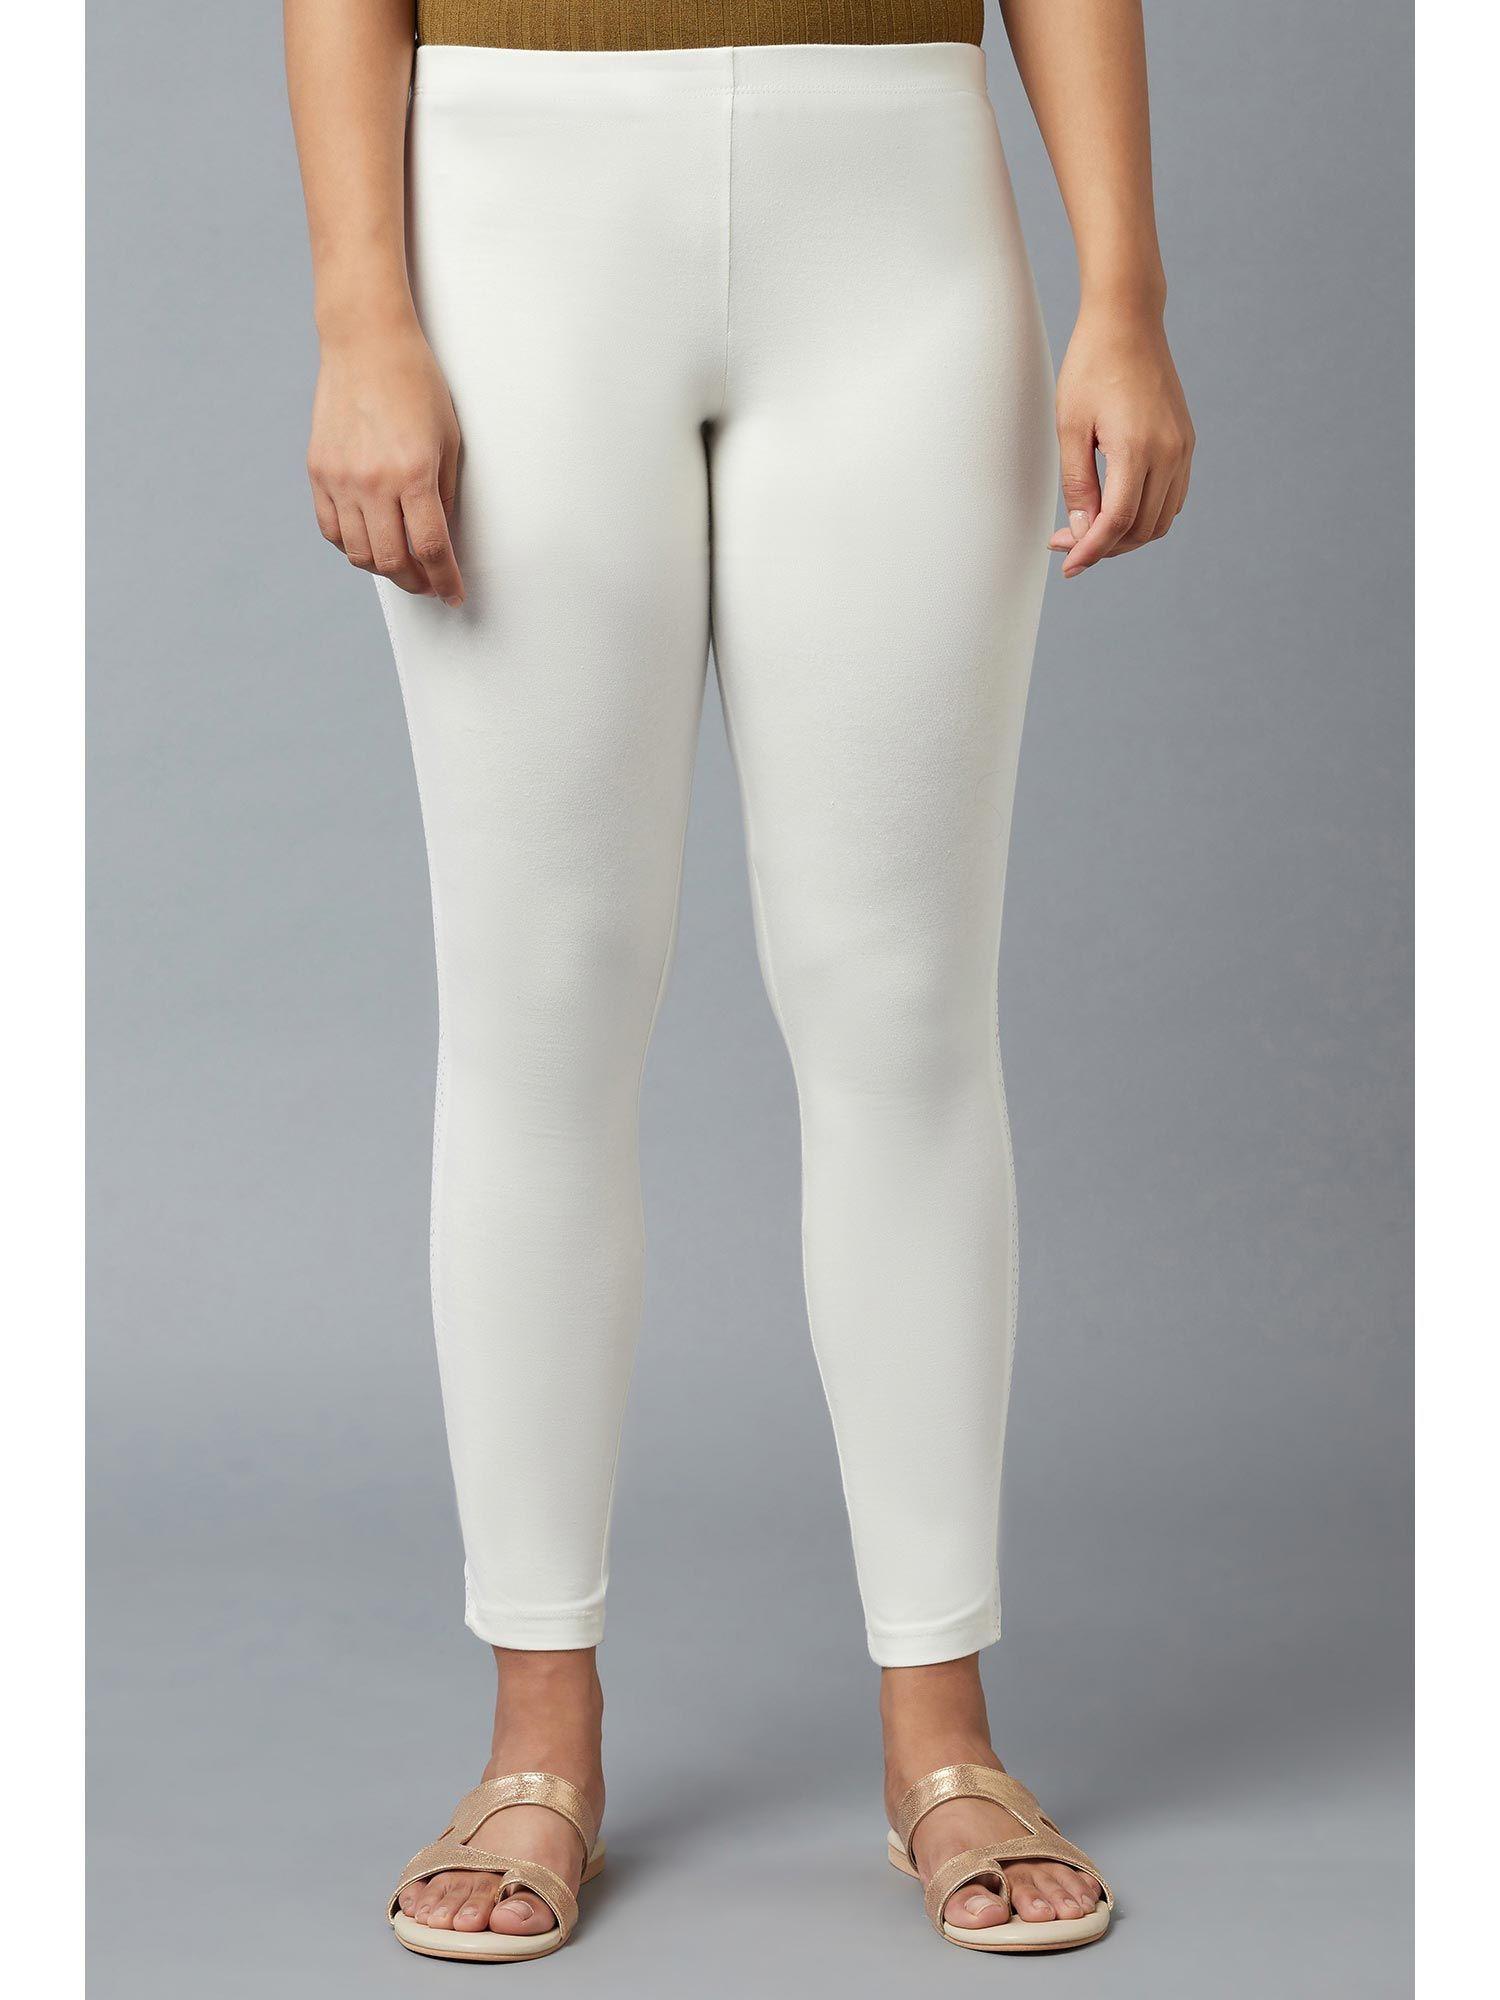 white cotton lycra tights for women